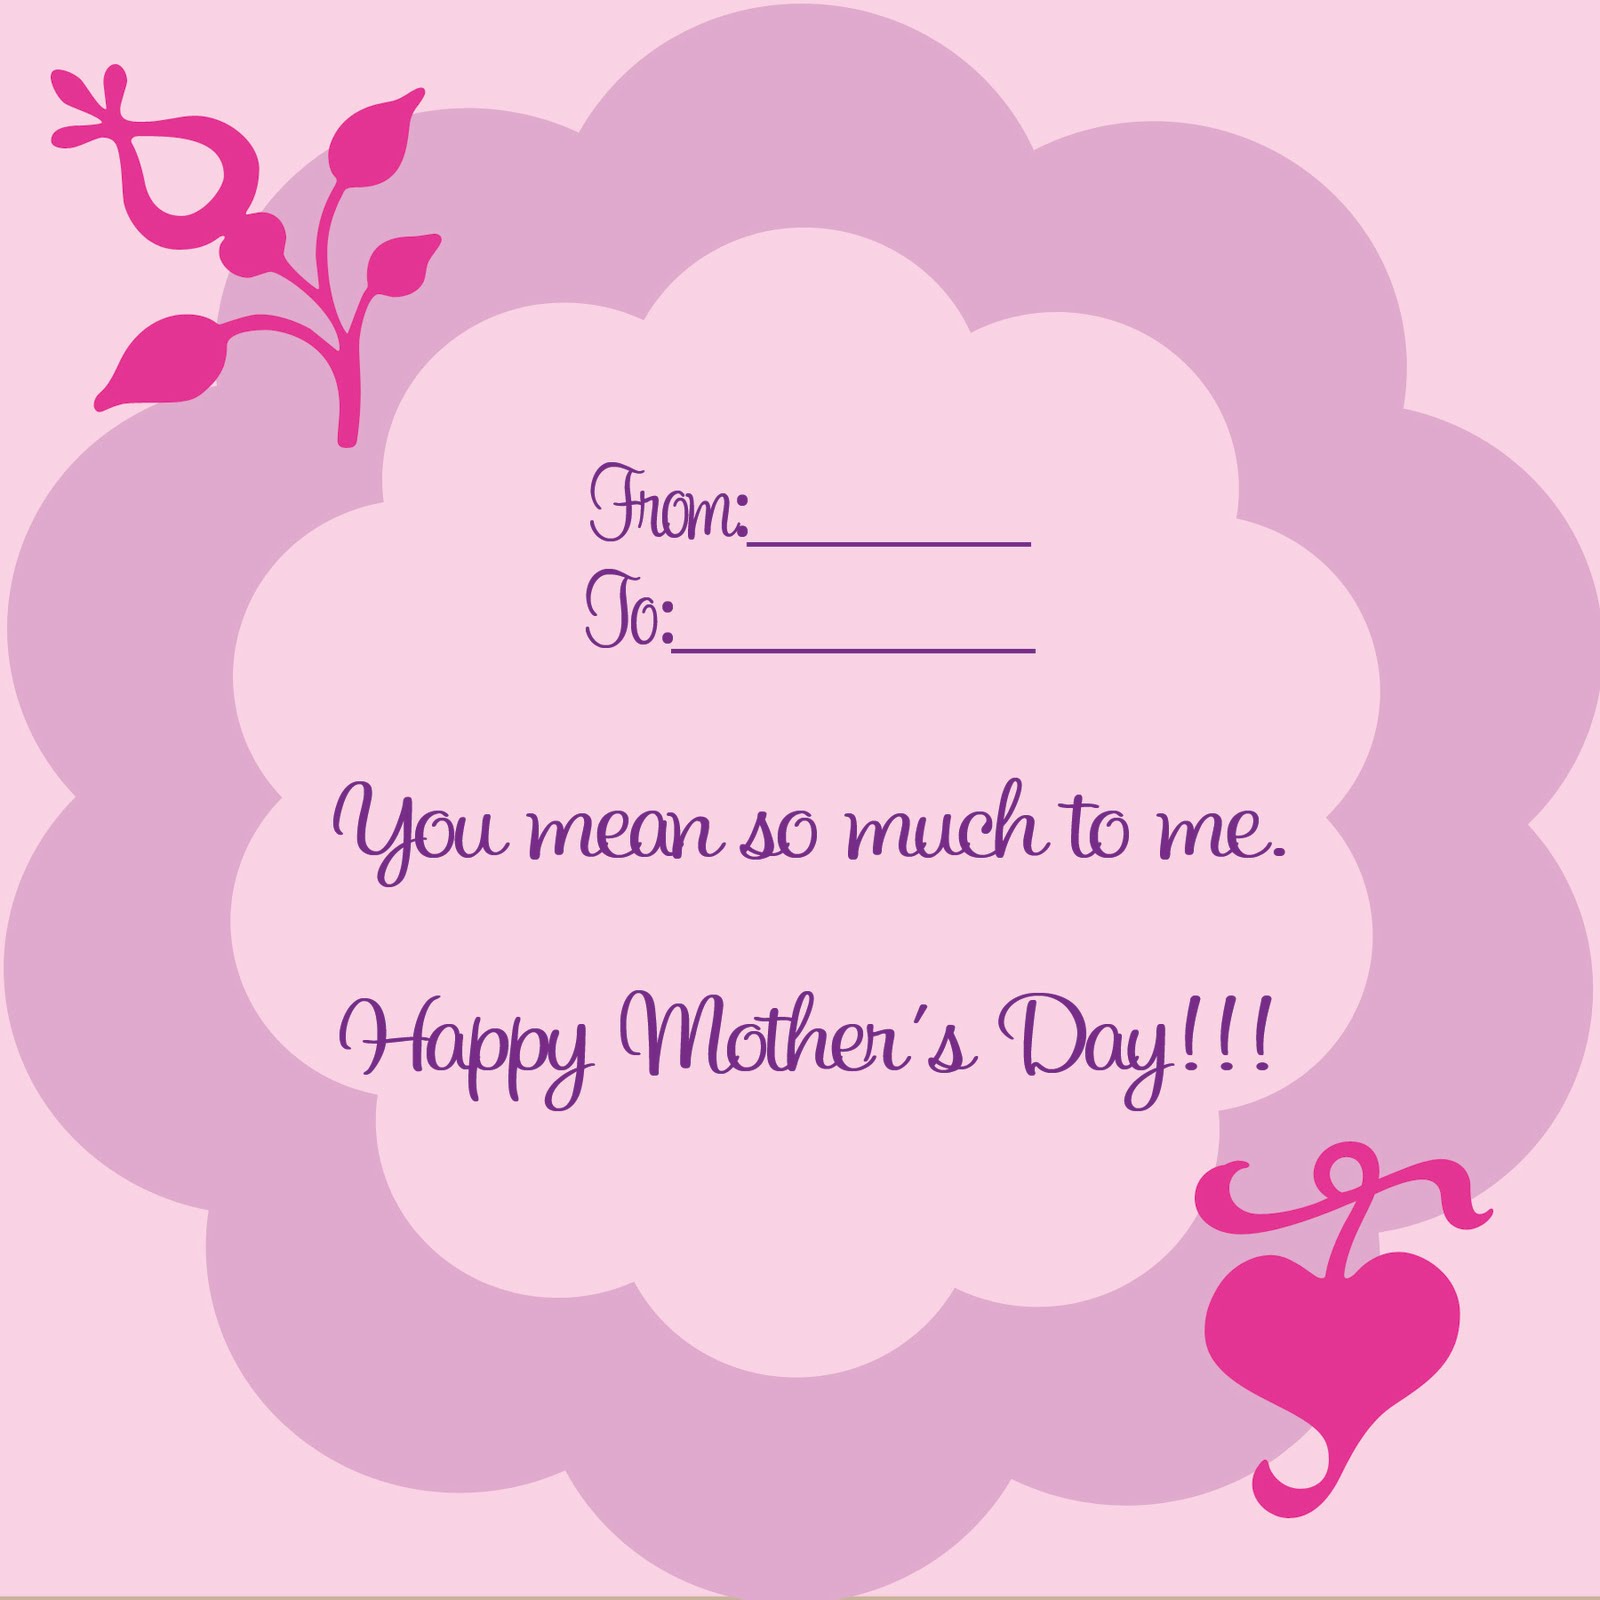 Mothers Day Cards - Mother's Day Card With Name - HD Wallpaper 